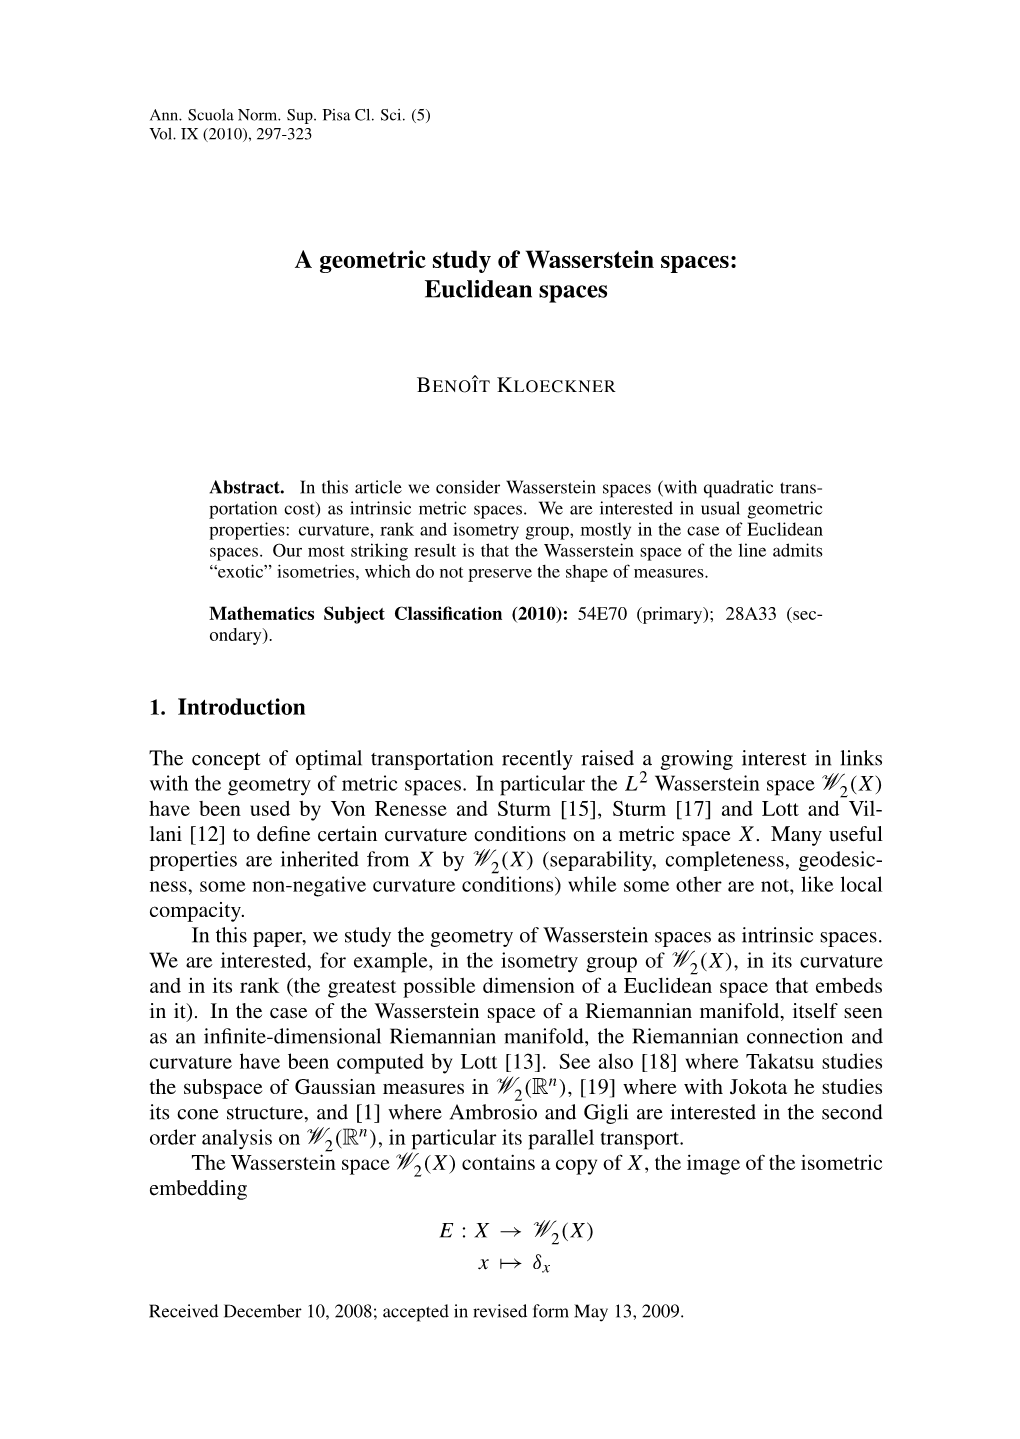 A Geometric Study of Wasserstein Spaces: Euclidean Spaces